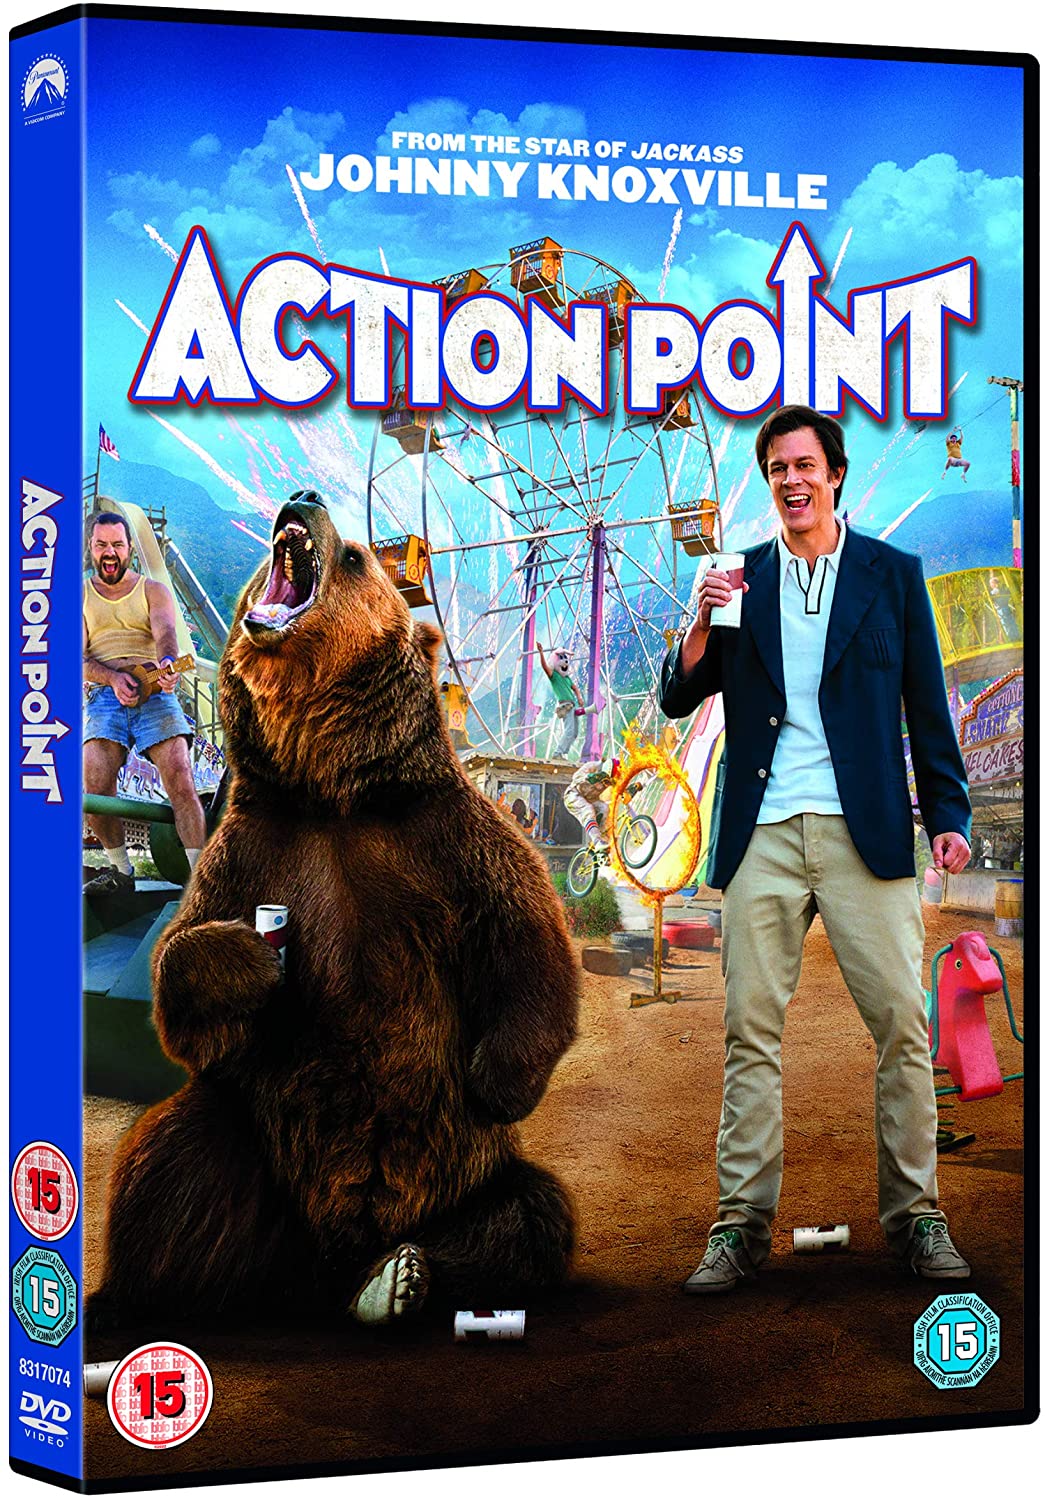 Action Point